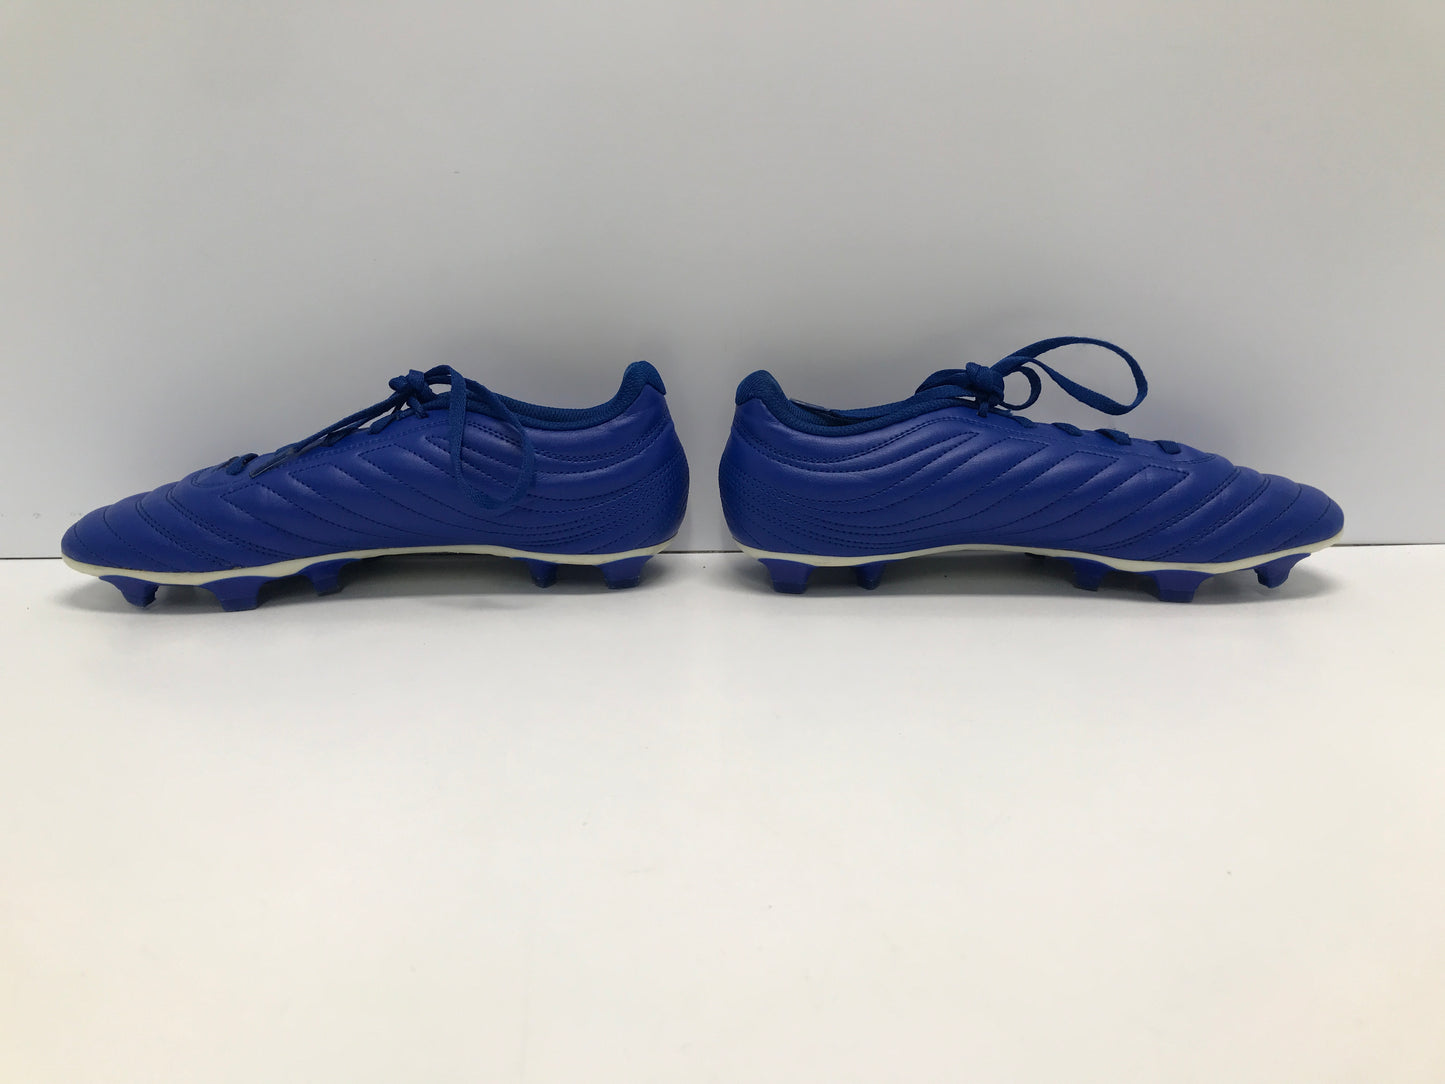 Soccer Shoes Cleats Men's Size 7.5 Adidas Blue White Like New